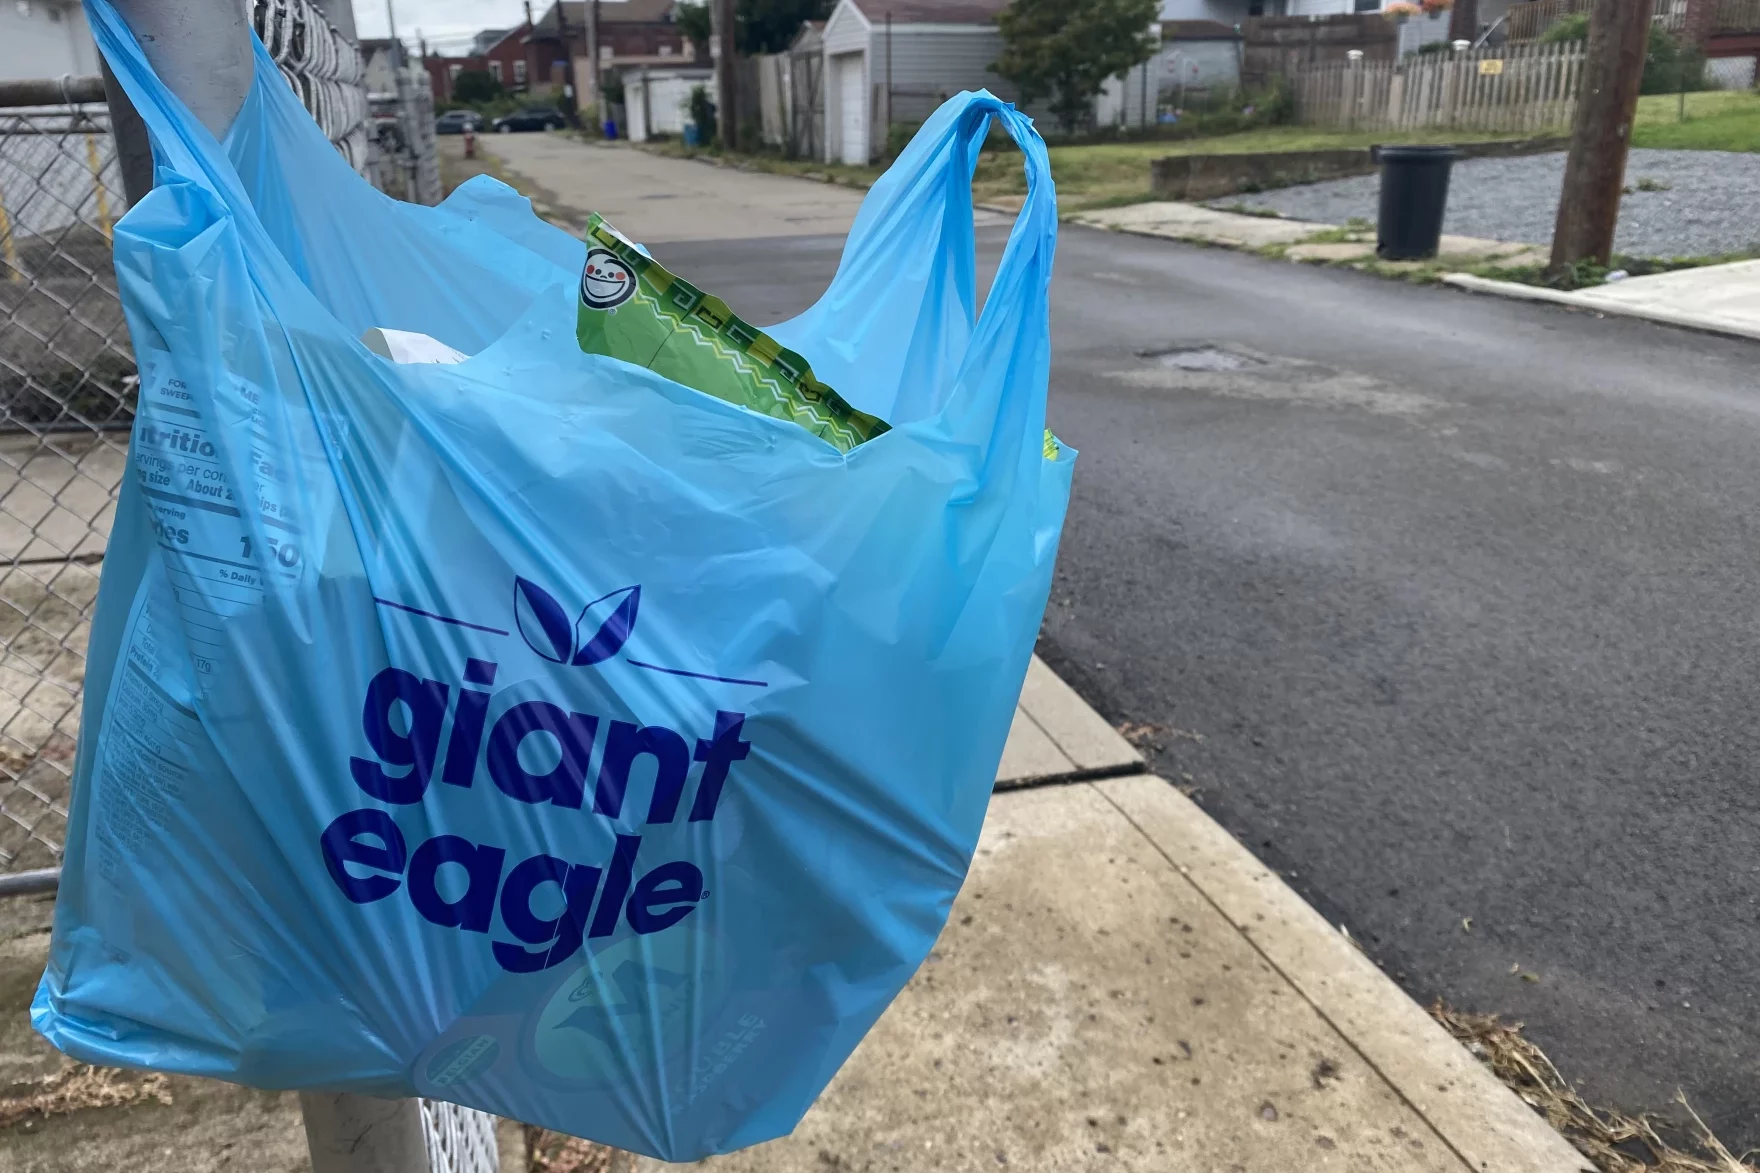 A blue Giant Eagle bag hanging on a fence post on a city street